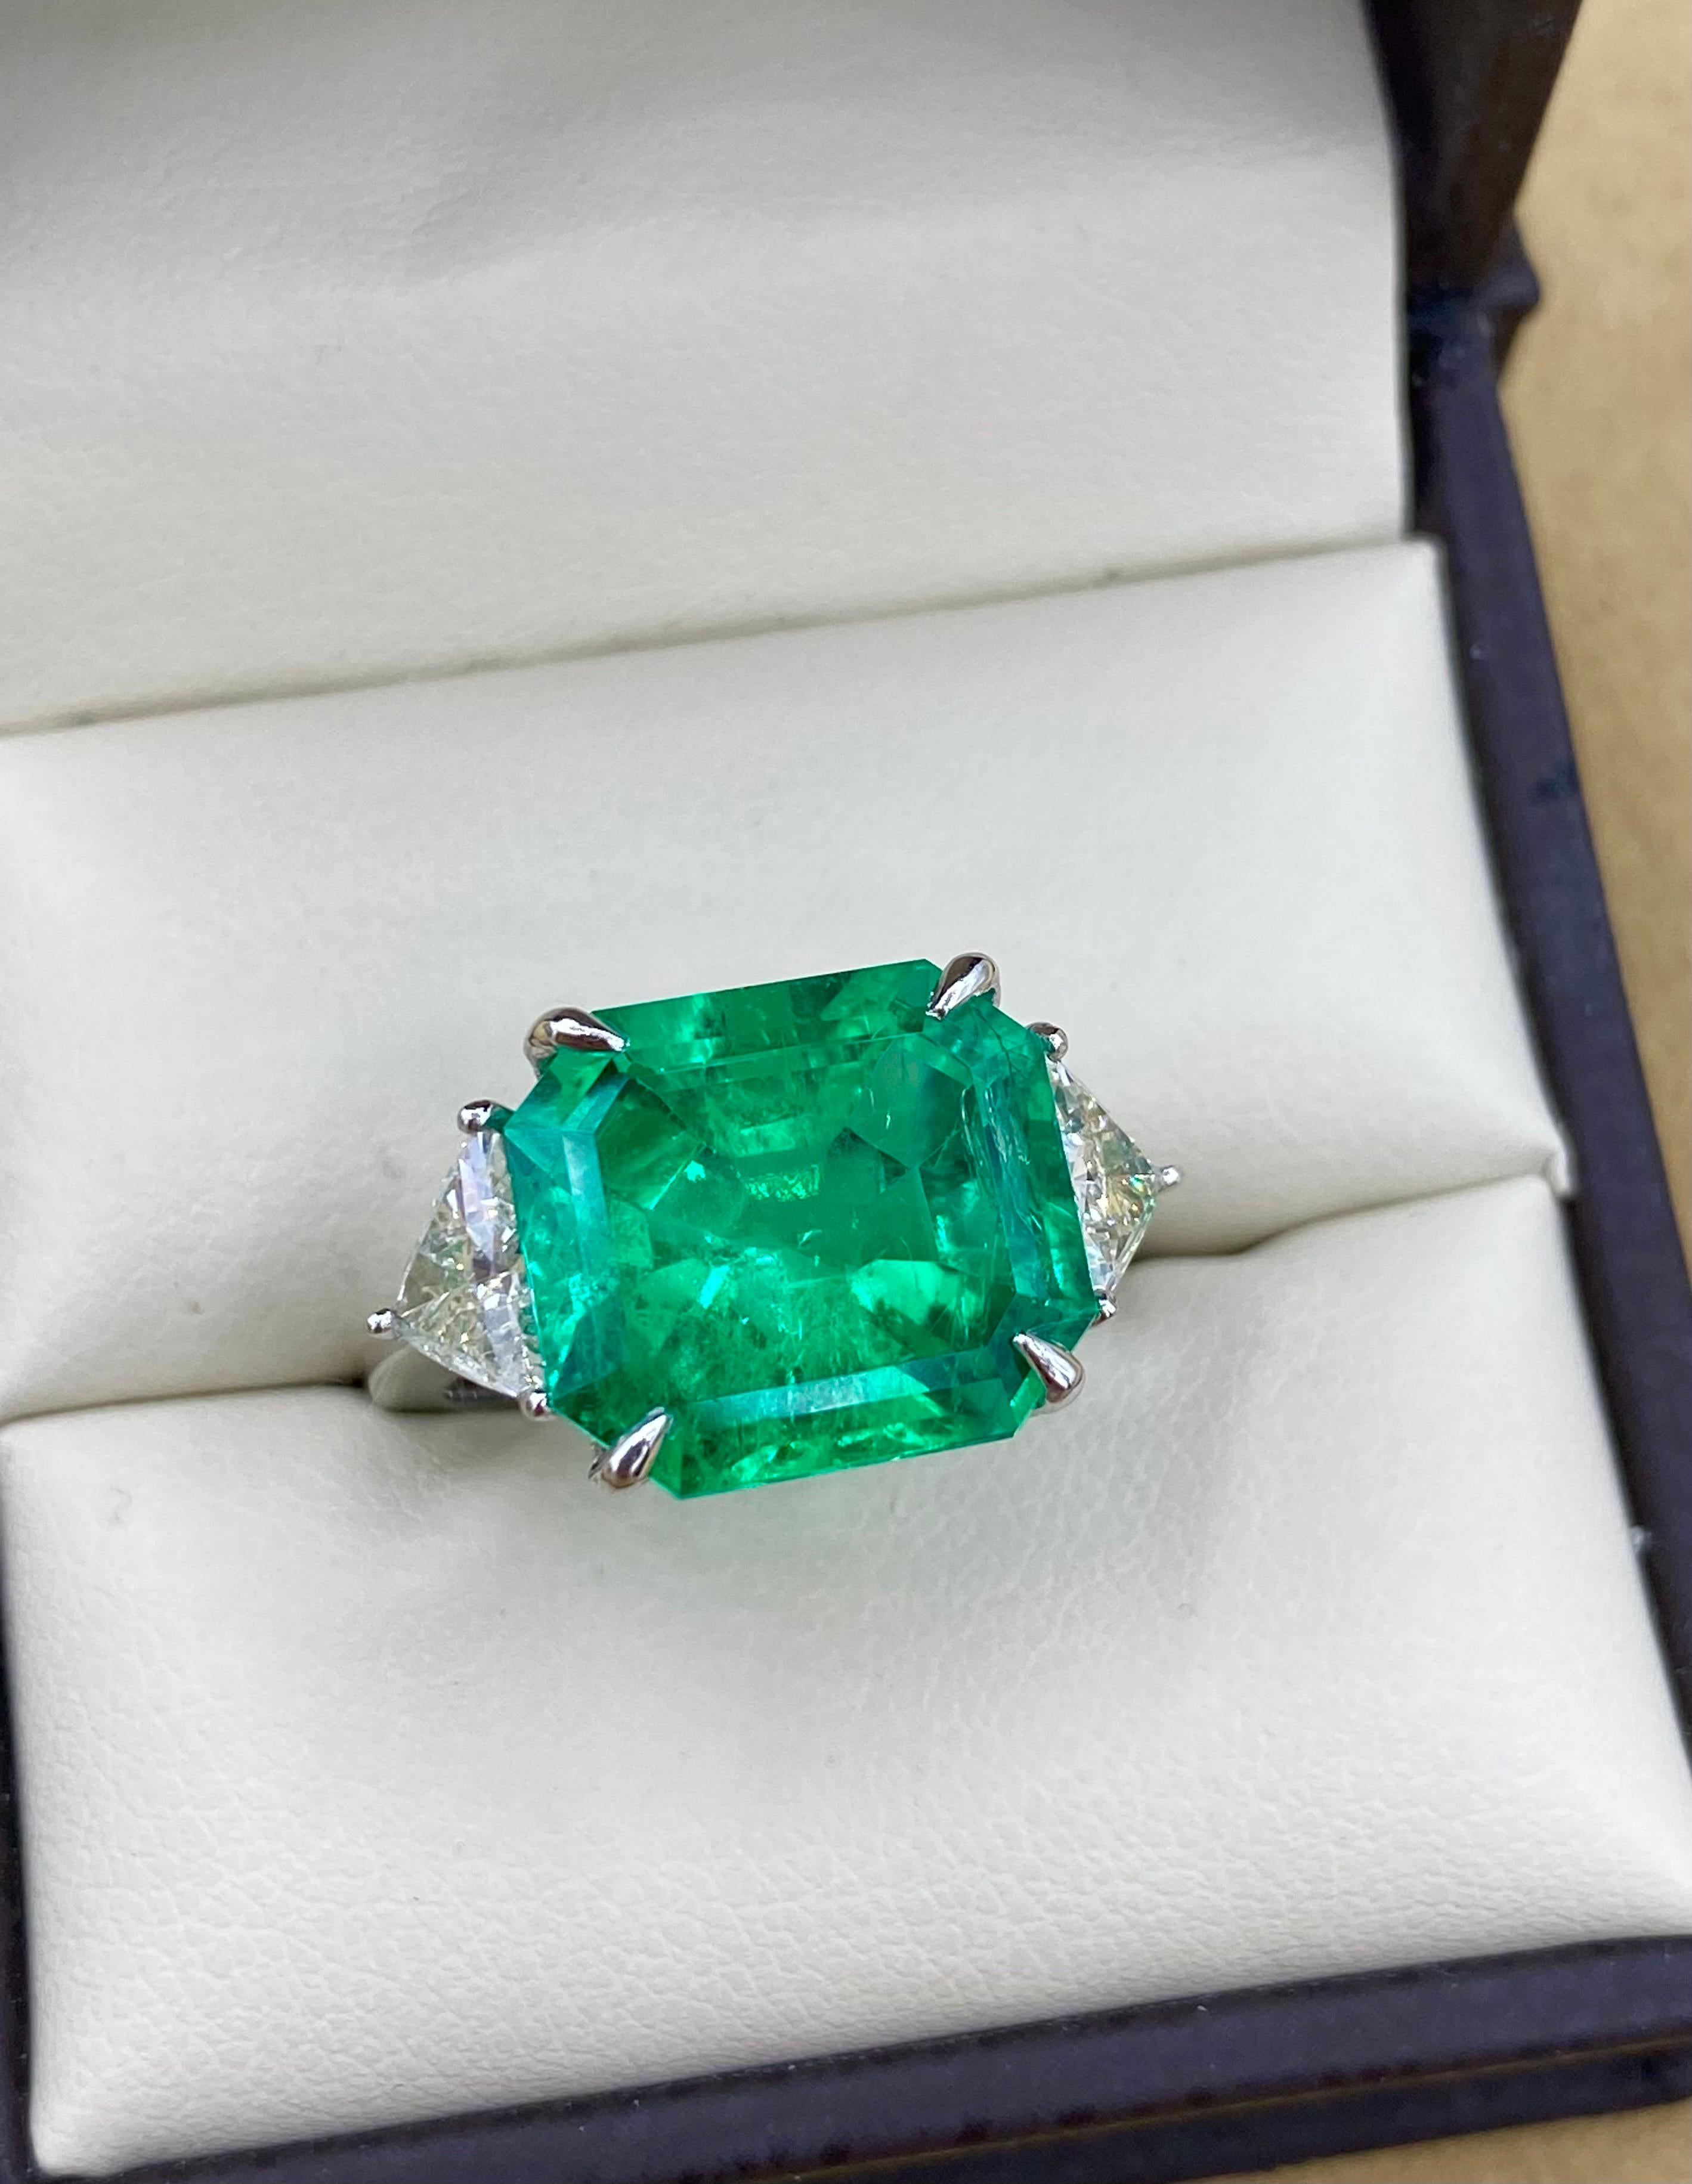 From the private collection of Emilio Jewelry located on New York's iconic Fifth Avenue,
One of the highest quality, rarest Muzo  Colombian emeralds we have ever seen is the focal point of this ring for those who want the Best of the best! The